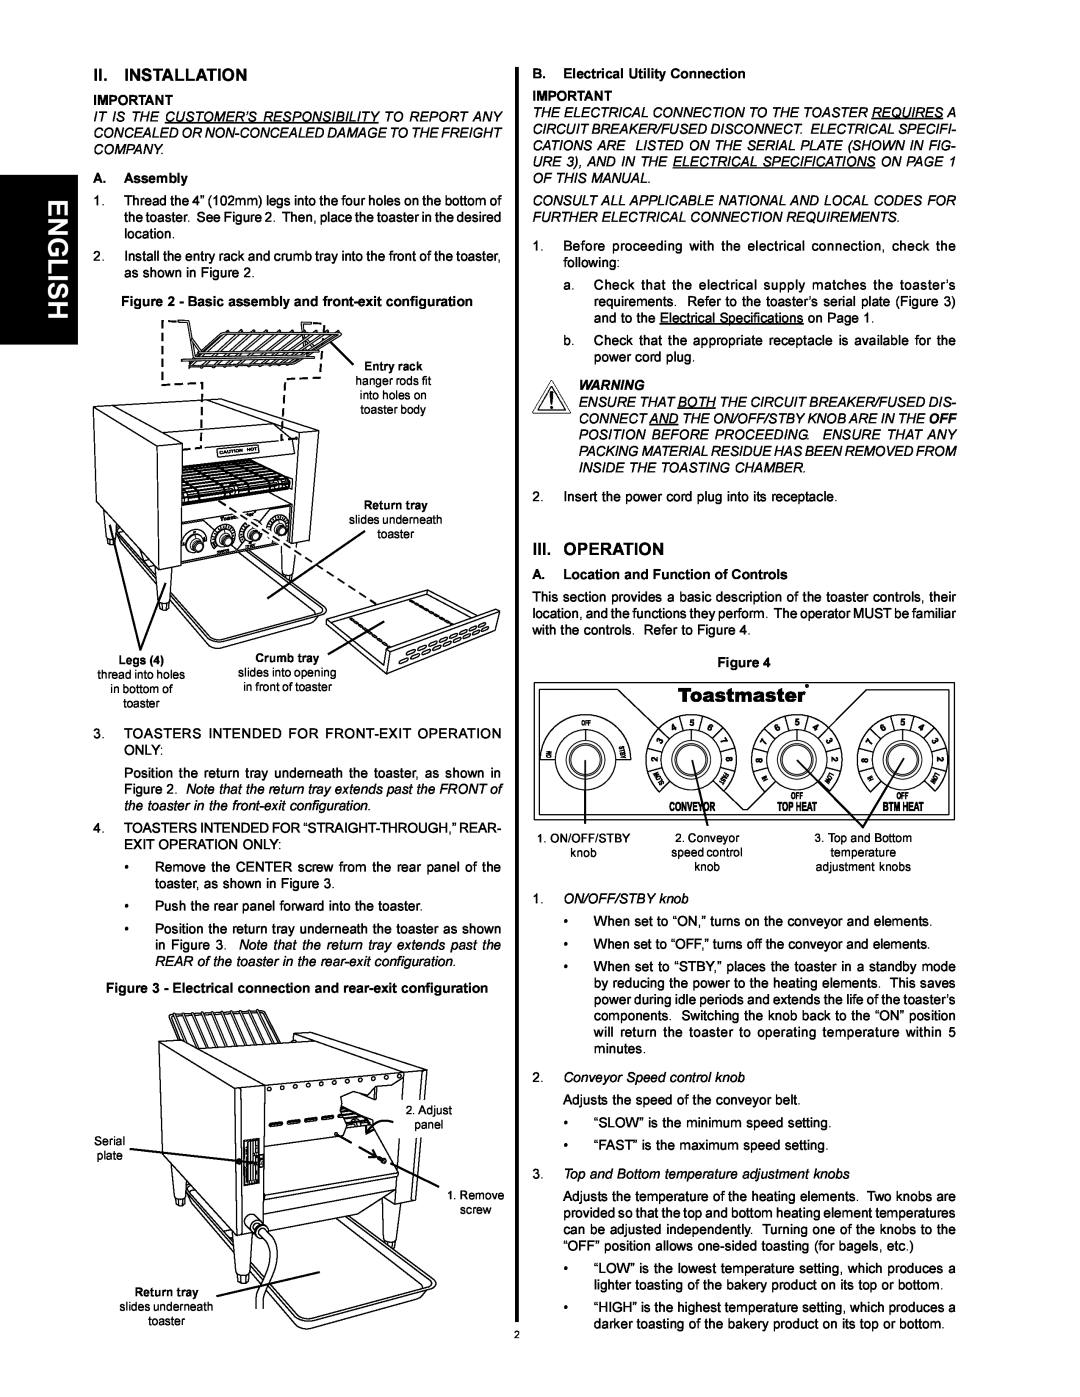 Toastmaster TC17A, TC21A installation manual Ii. Installation, Iii. Operation, A.Assembly, B.Electrical Utility Connection 